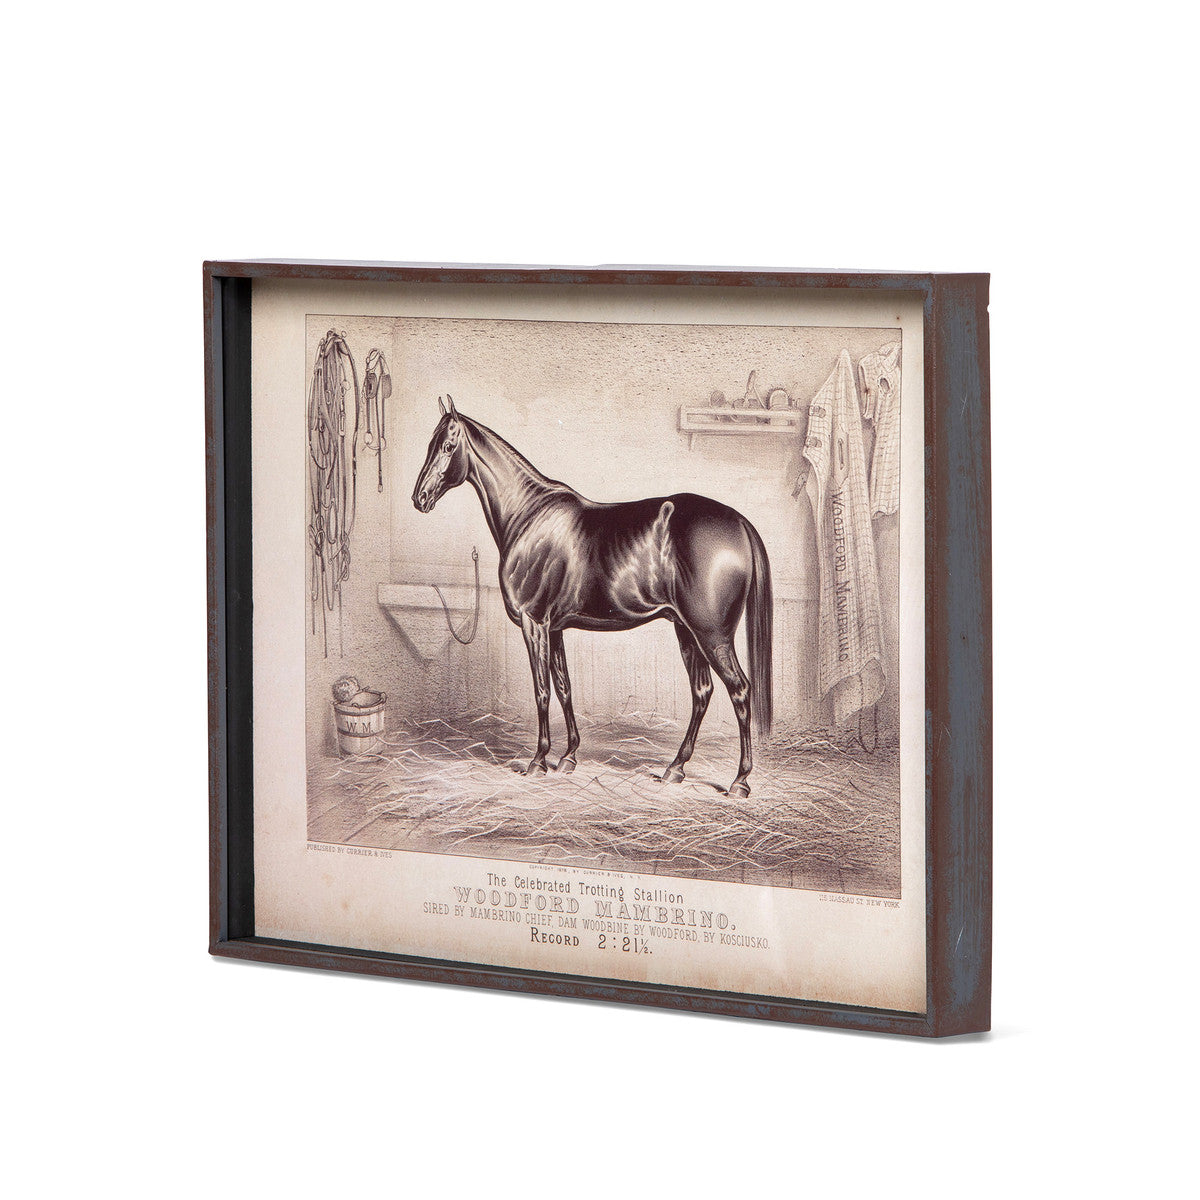 Prized Race Horse Framed Prints - 6 Assorted Styles